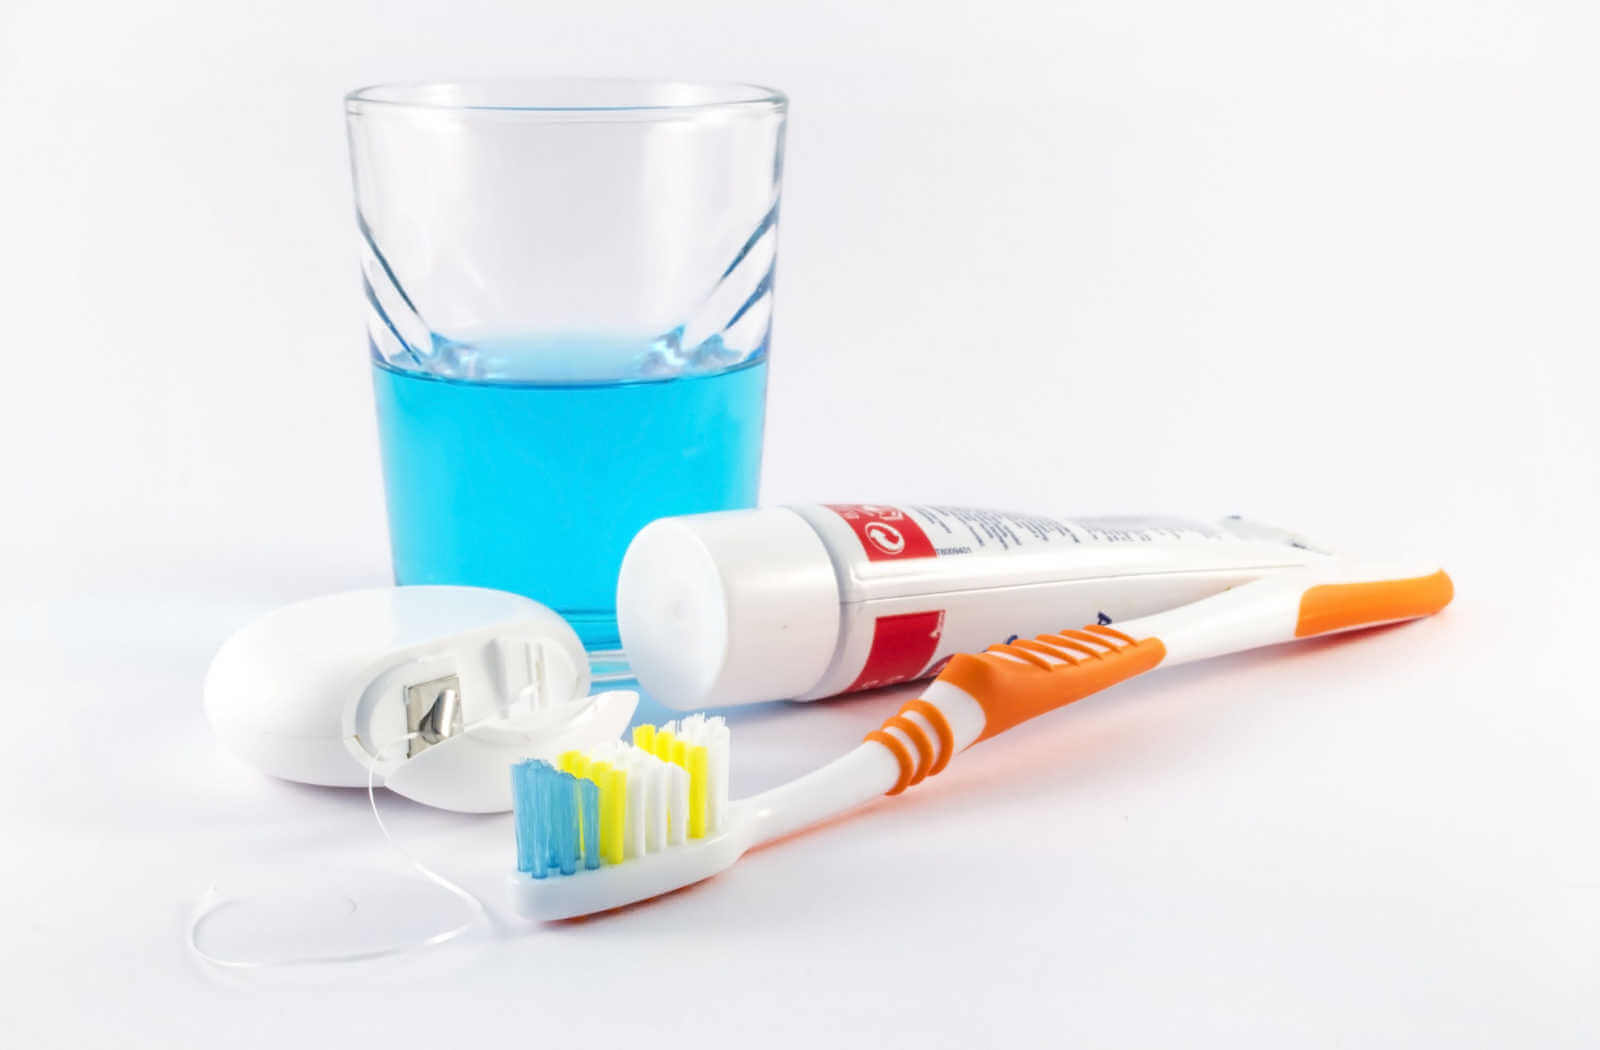 Showing in the photos are of a half glass of blue-coloured mouthwash, toothpaste in a white tube, a  small case of the dental floor, and an orange-coloured toothbrush.